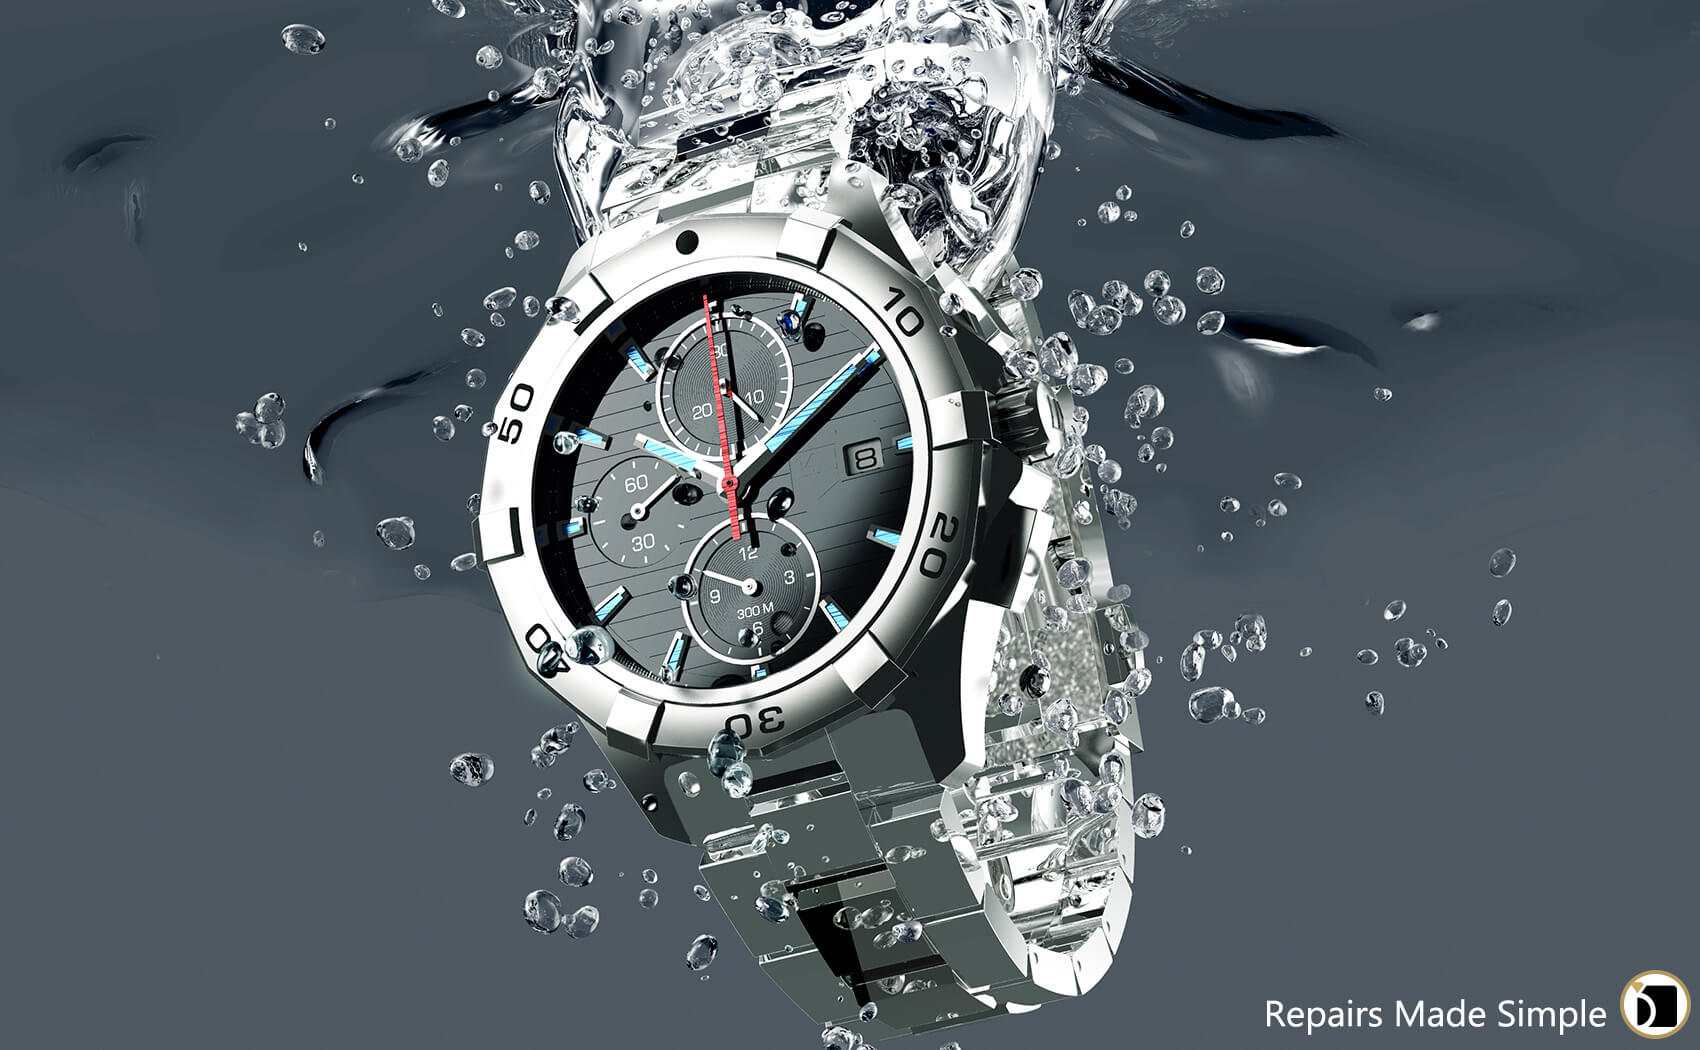 Image showcasing water resistant watch submerged